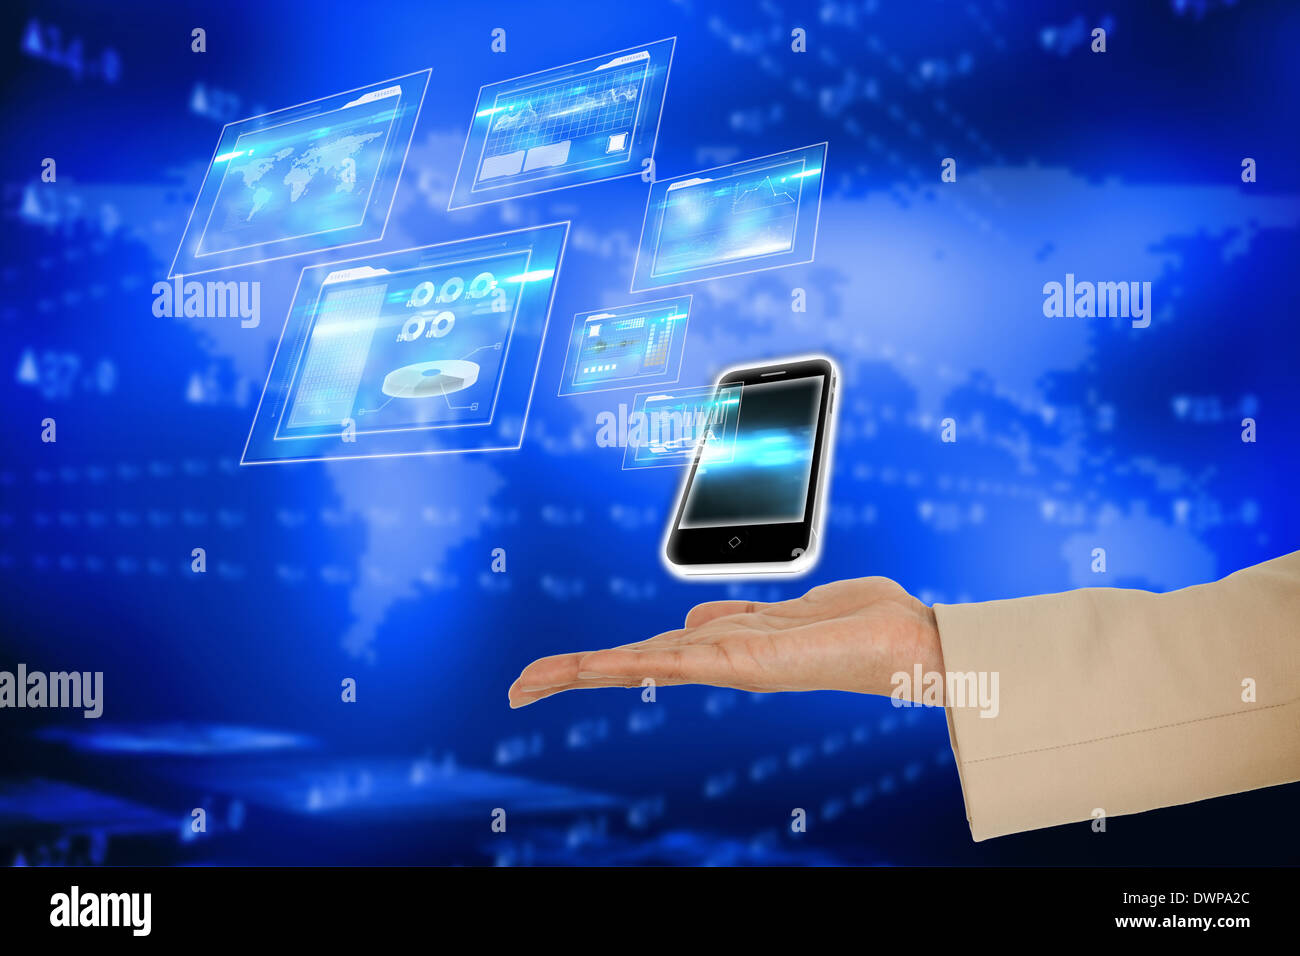 Hand presenting smartphone and interfaces Stock Photo